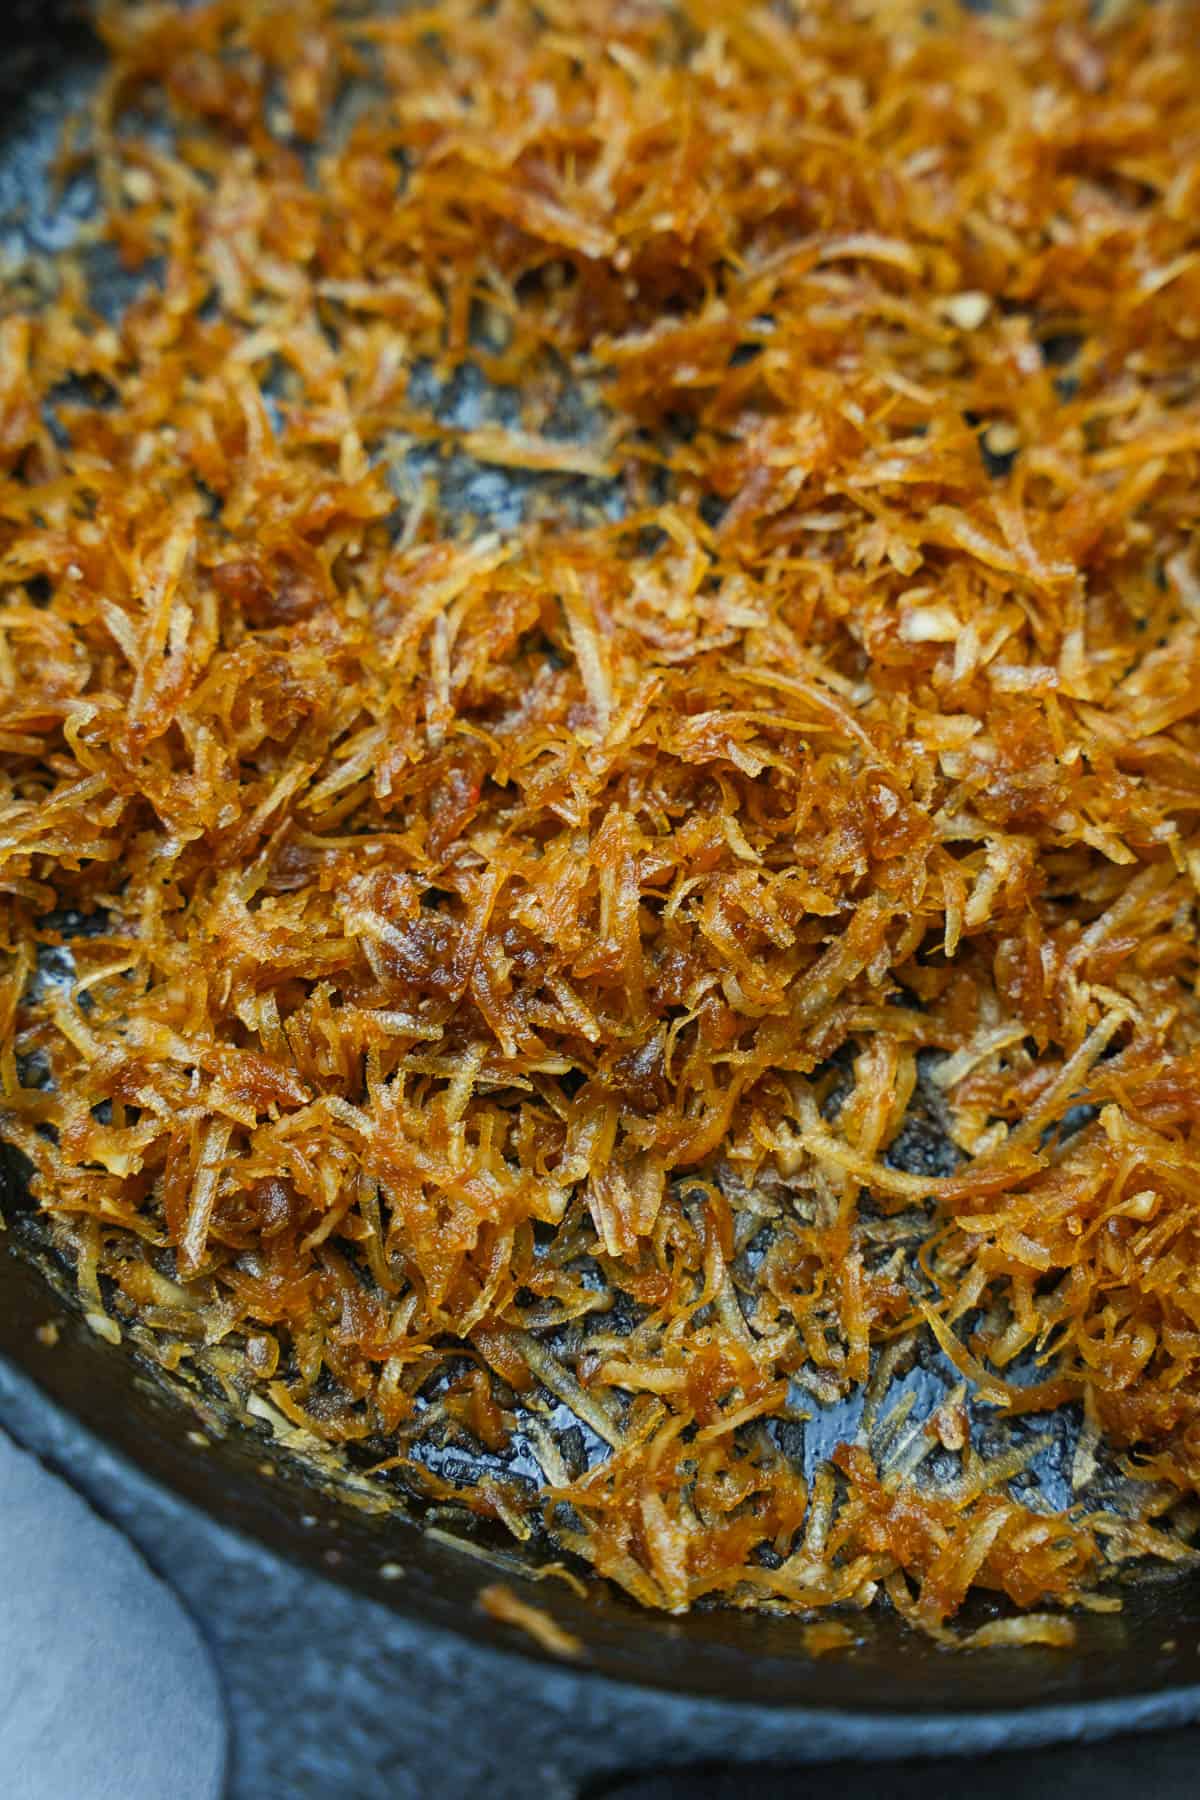 Coconut filling is cooked in a black cast iron skillet.